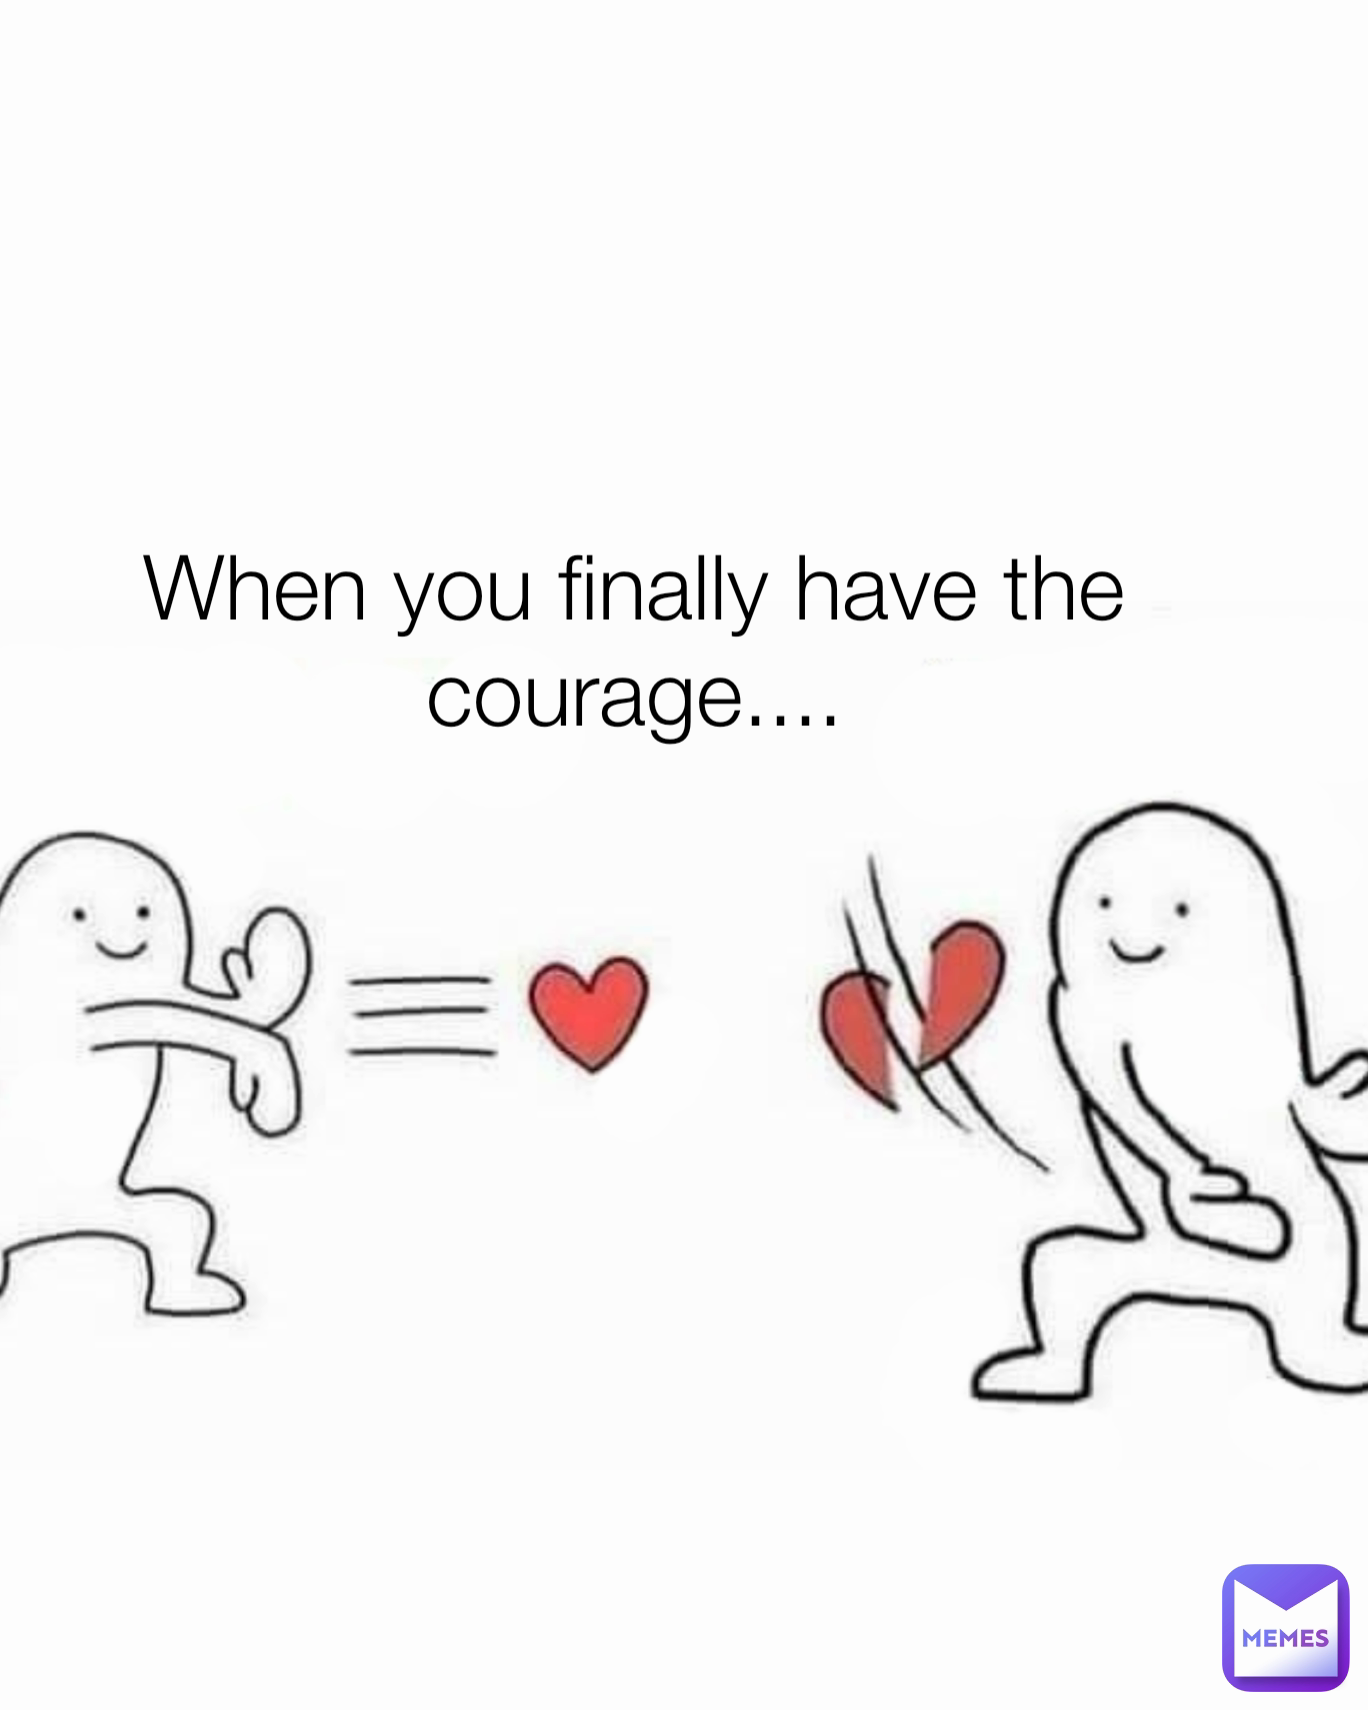 When you finally have the courage....